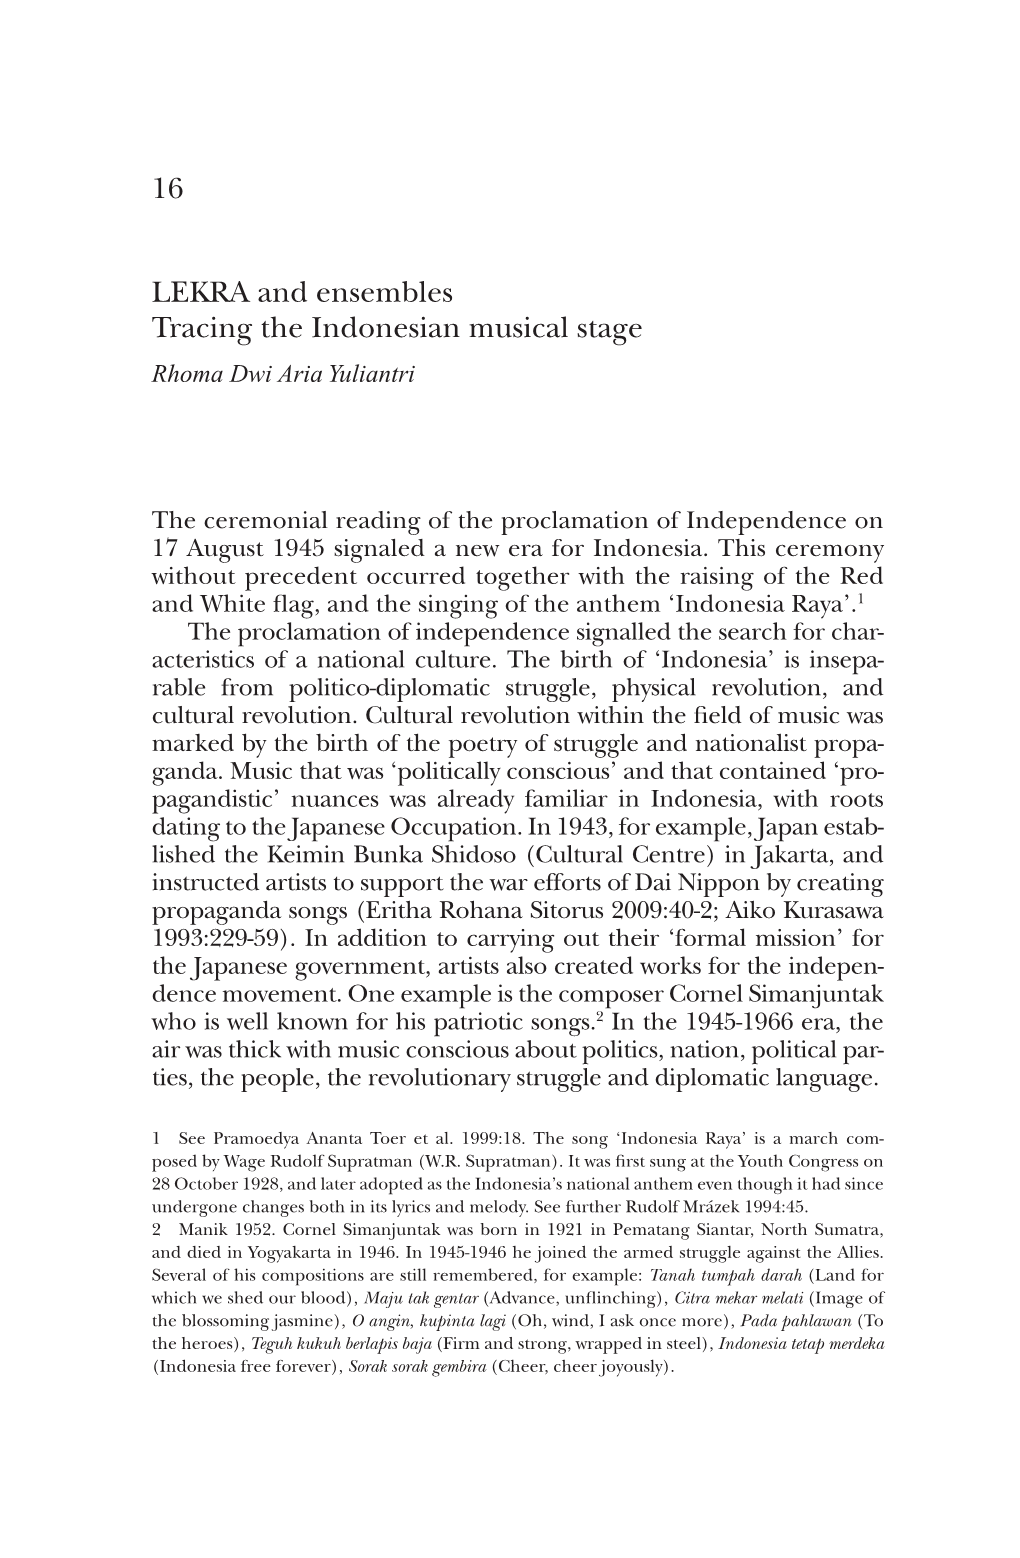 16 LEKRA and Ensembles Tracing the Indonesian Musical Stage